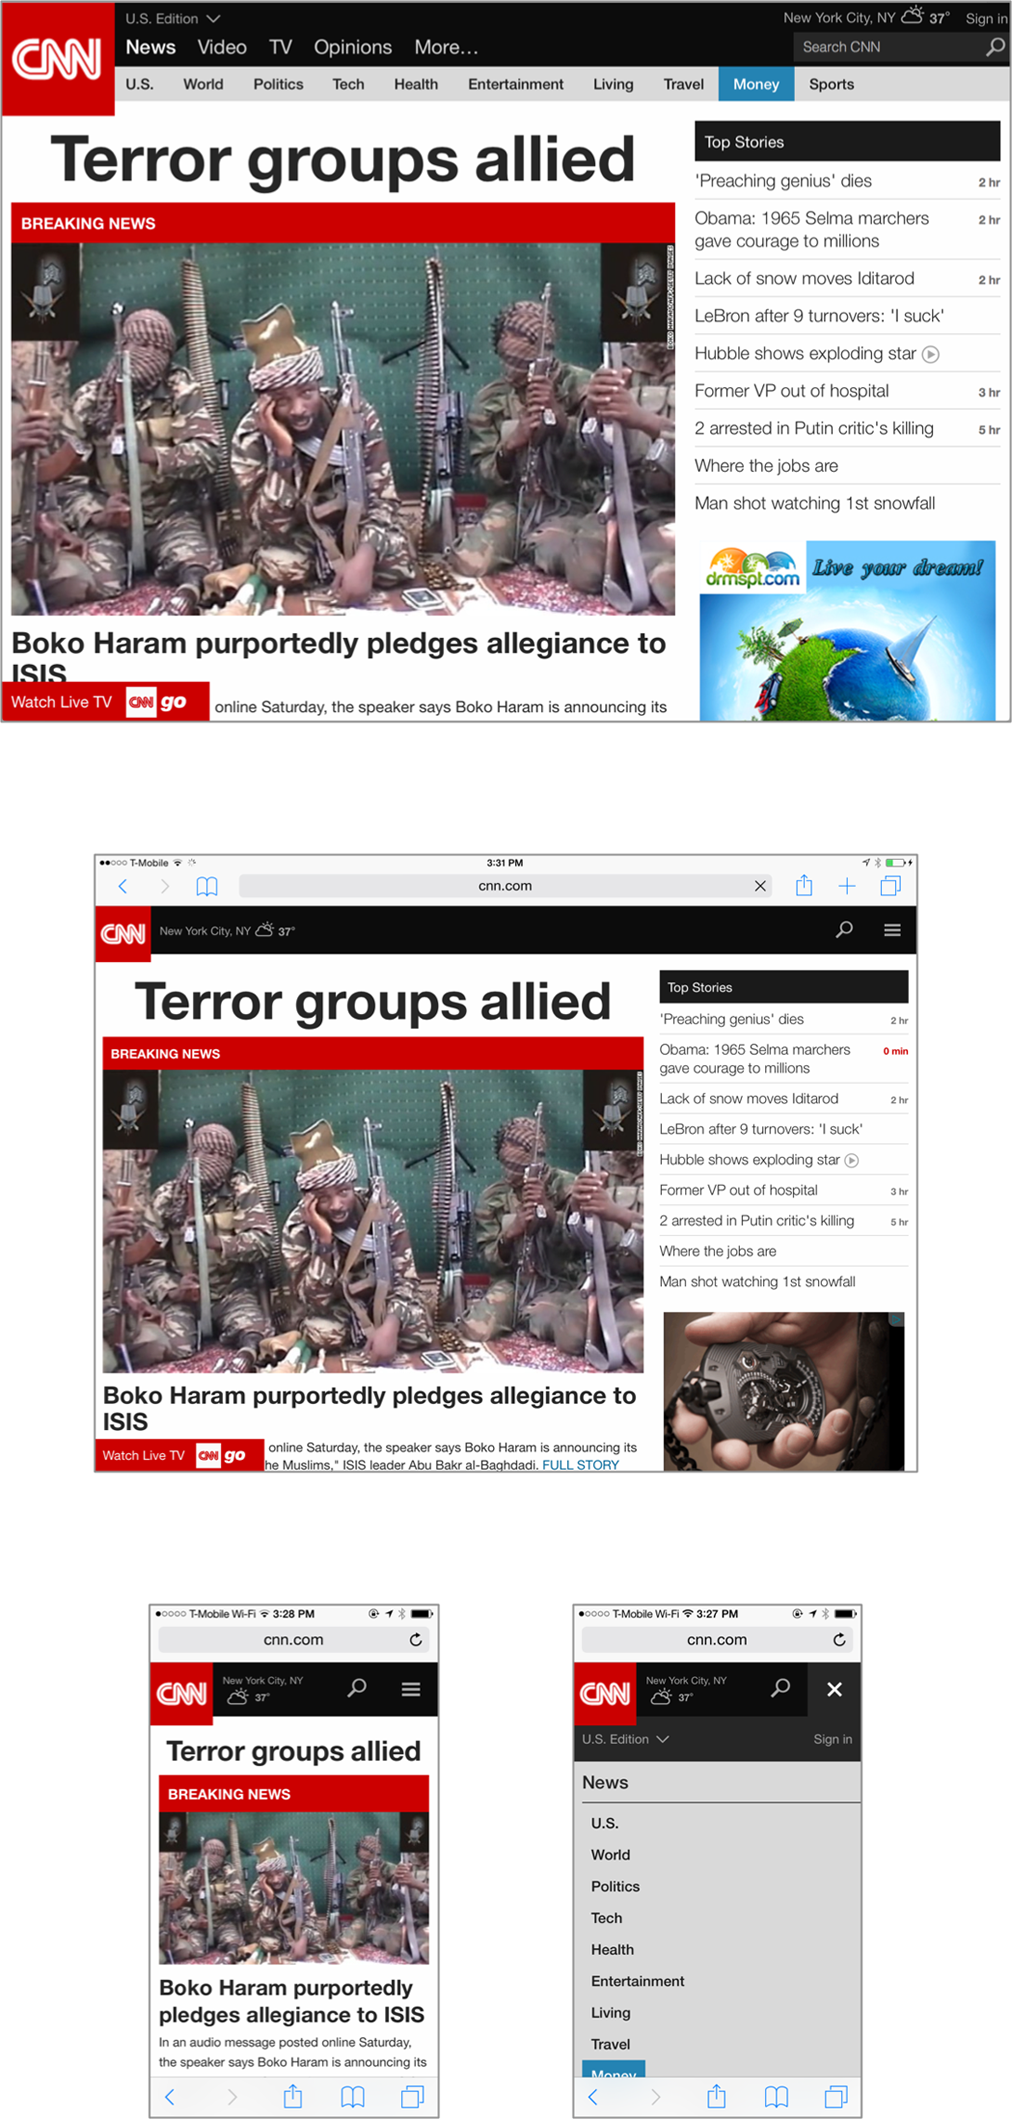 CNN’s website uses a responsive layout that adapts page elements to fit different screen sizes, while offering a coherent experience